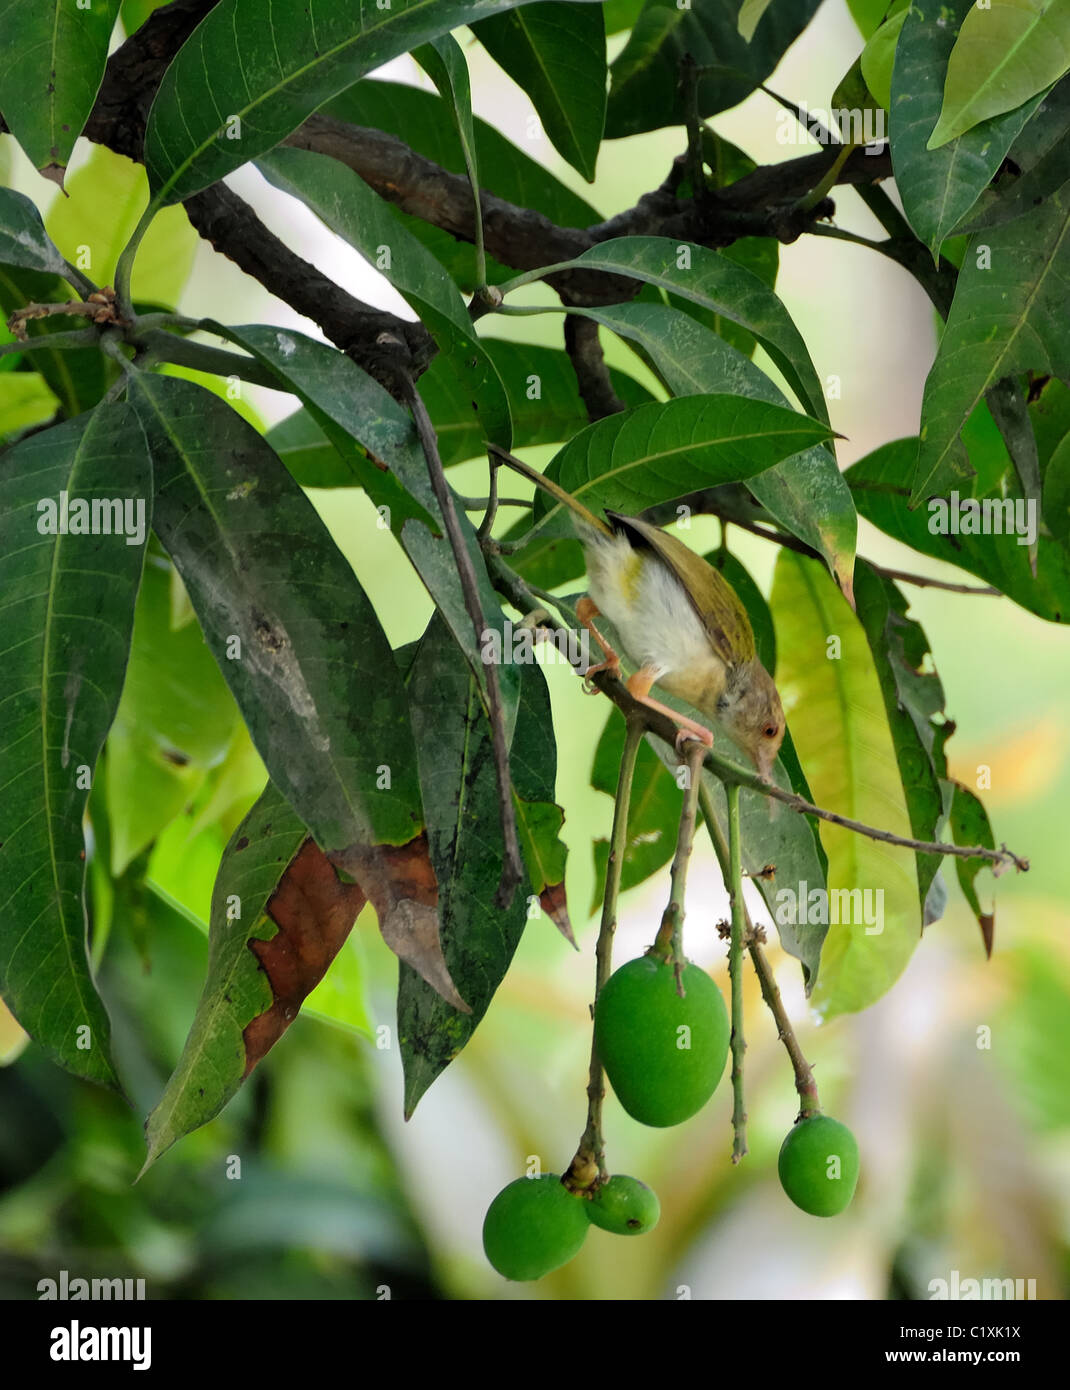 A tailor bird, Orthotomus sutorius, on a mango tree branch with green mangoes with copy space Stock Photo